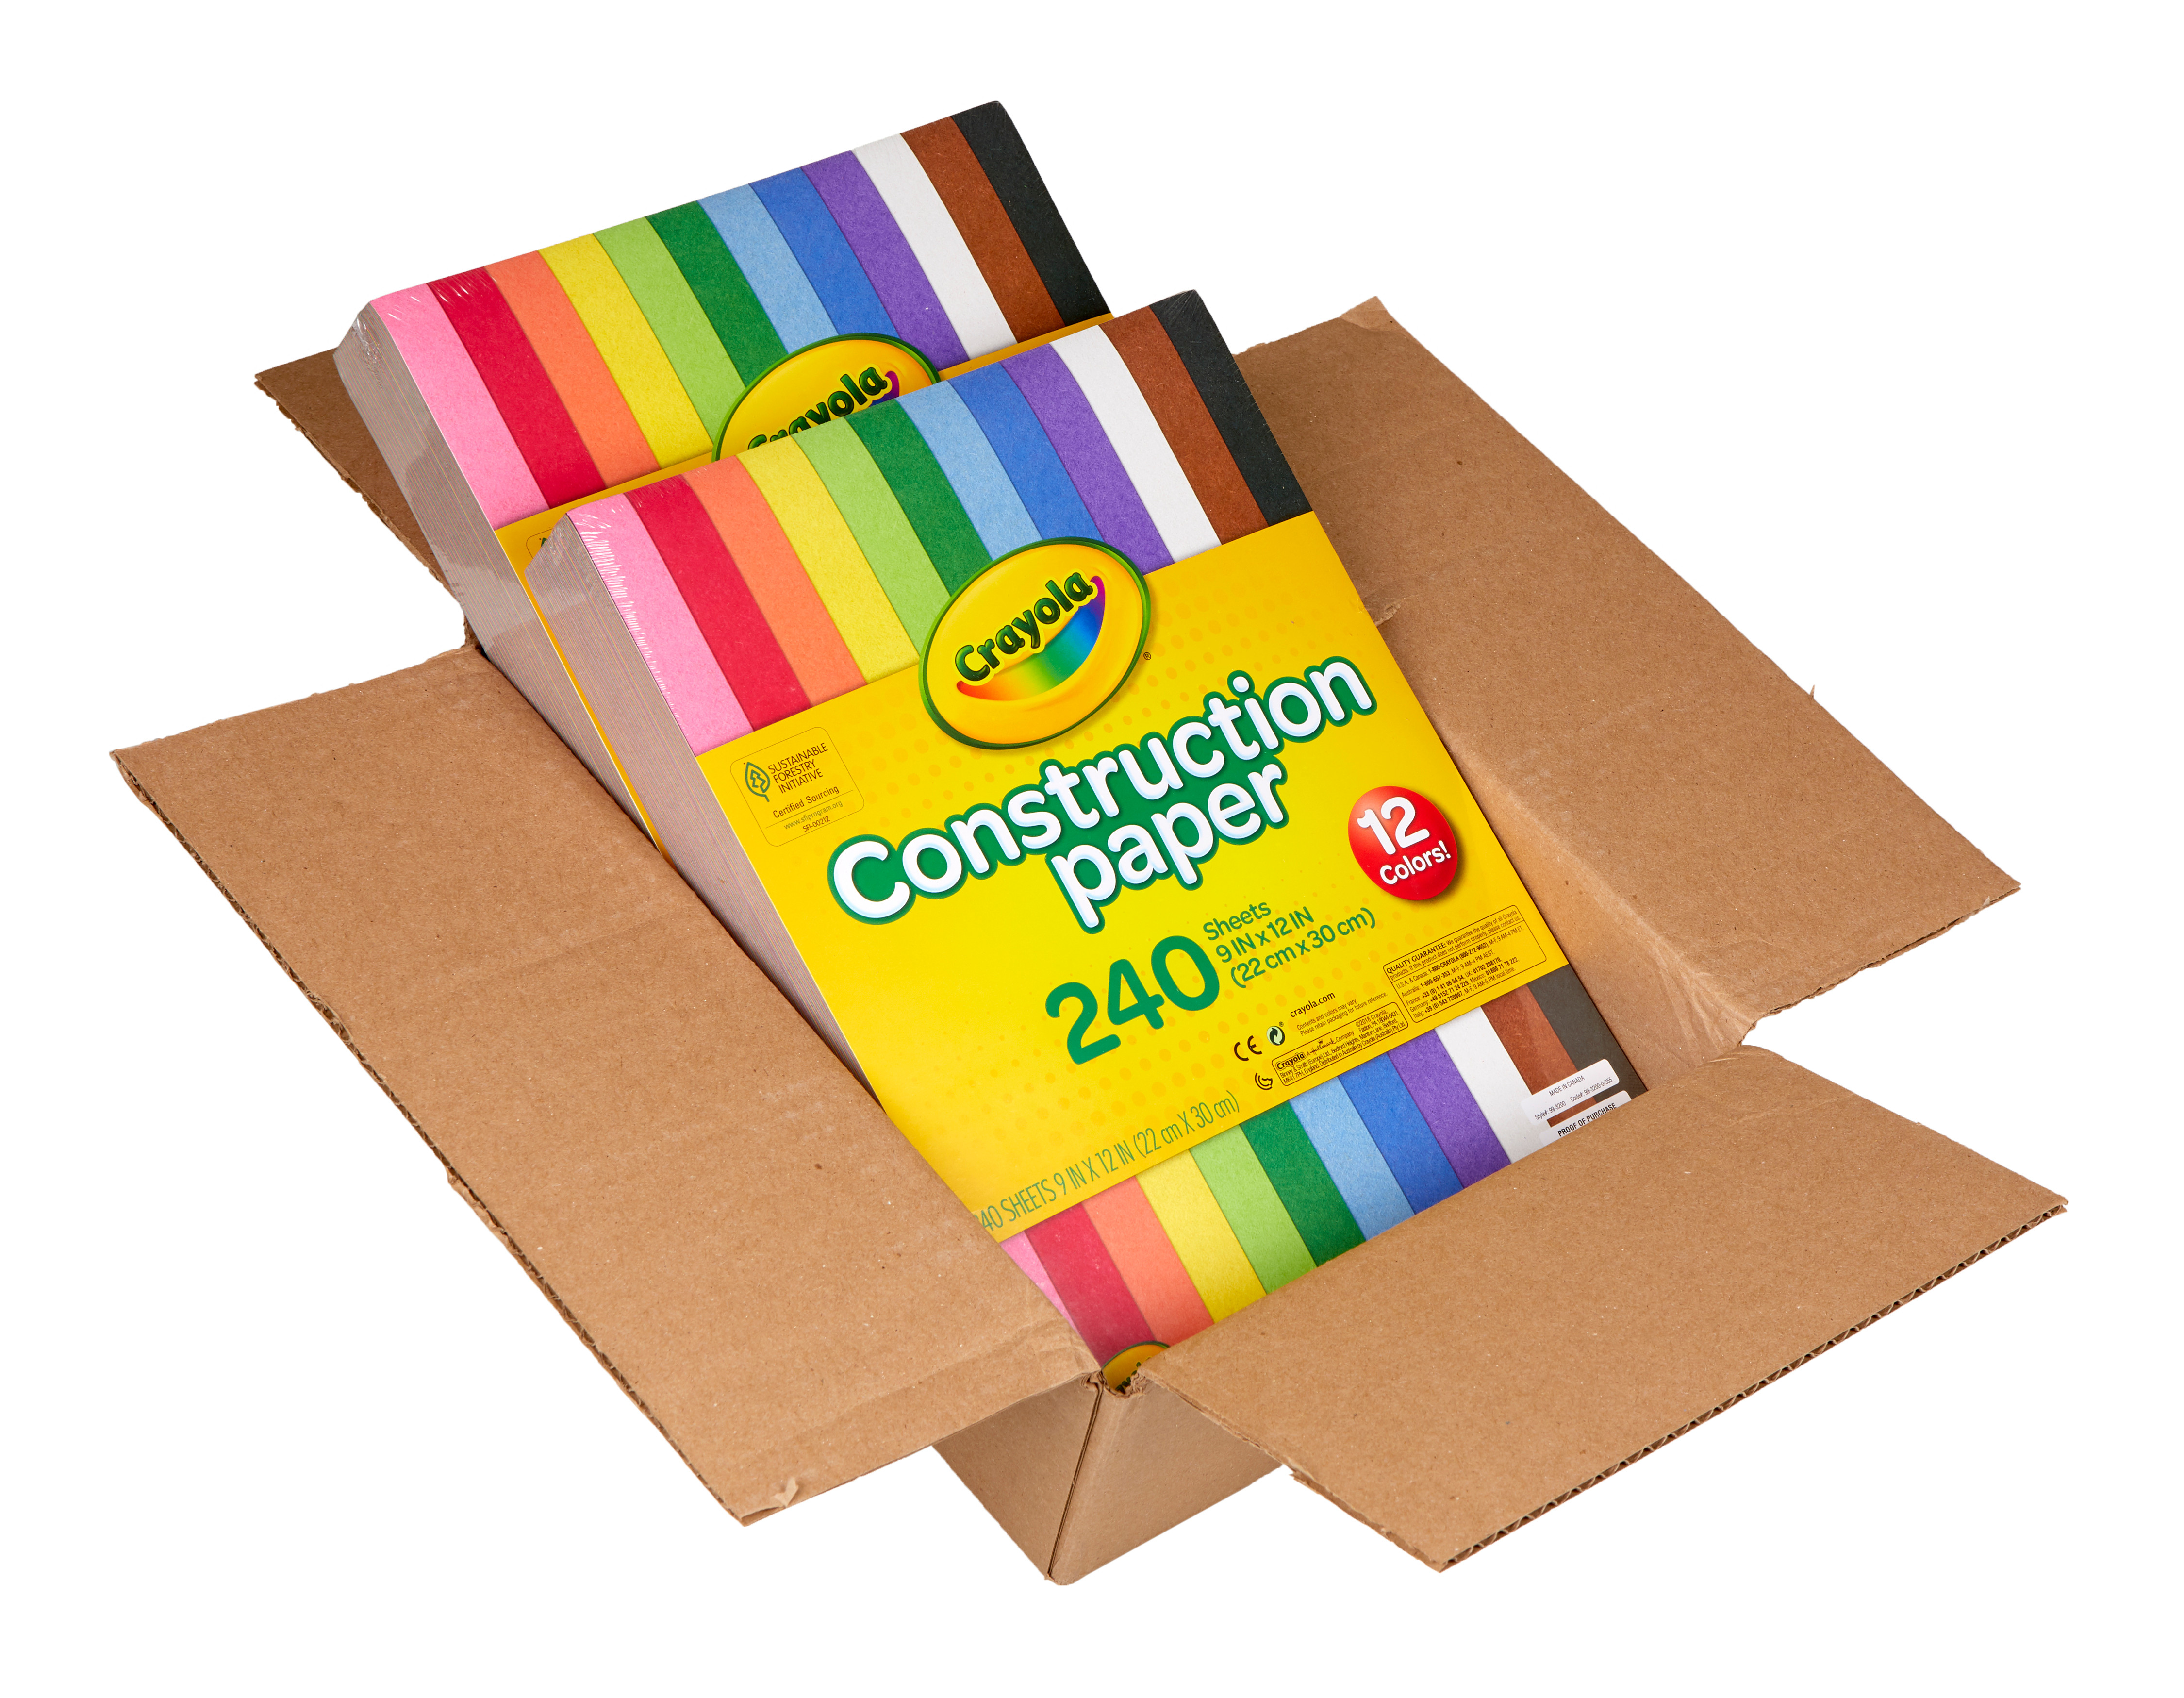 Crayola Construction Paper, 240 Count, 2-Pack (Total 480 Count)